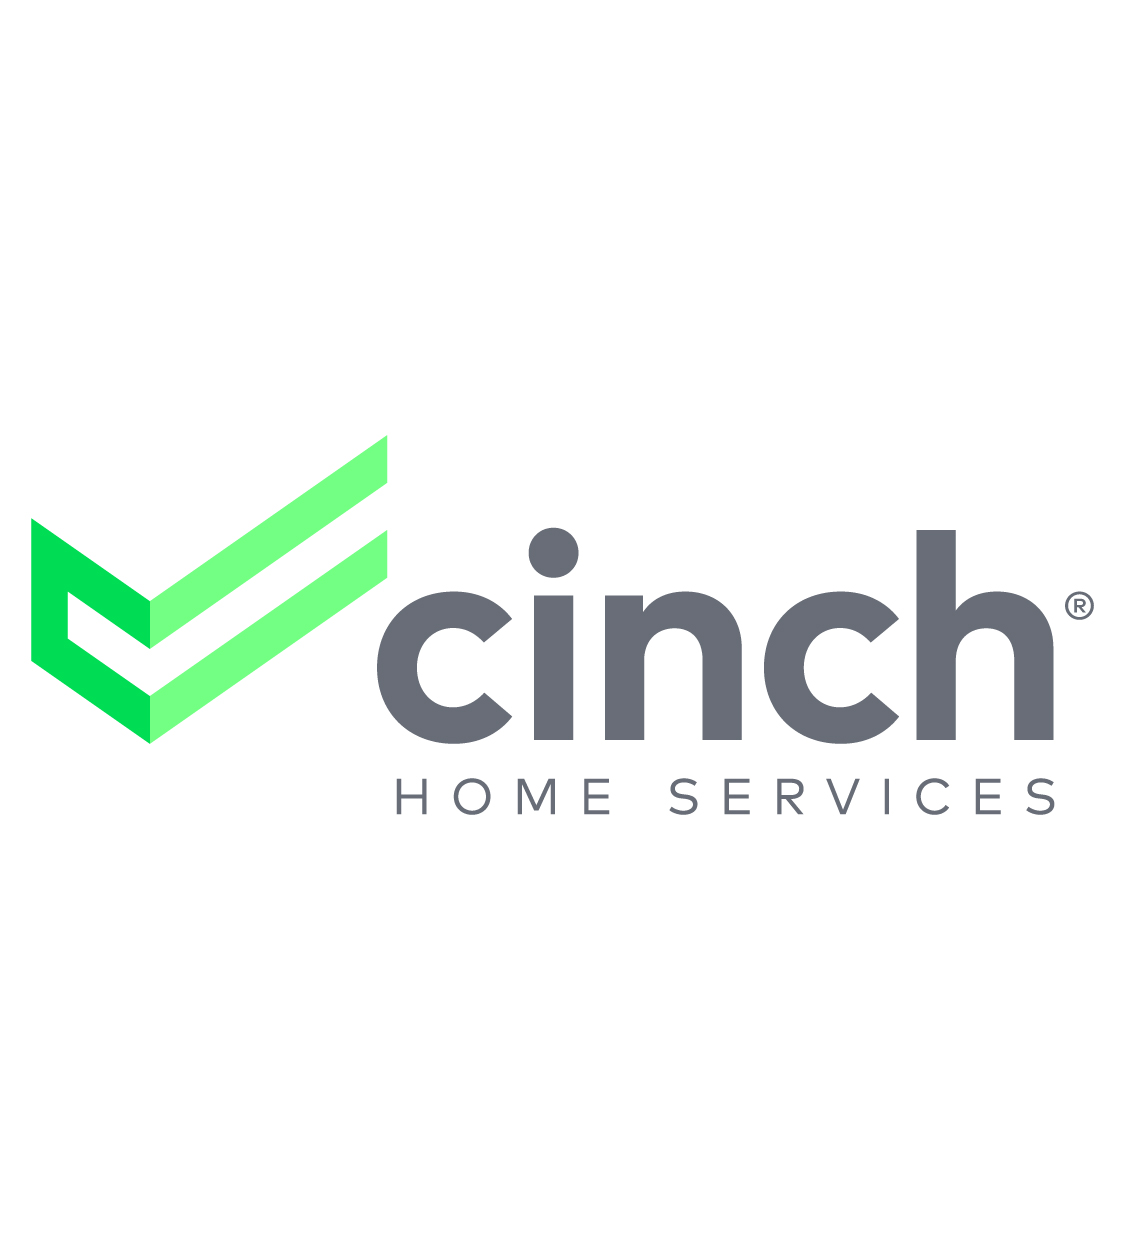 Agency Revolution partners with Cinch Home Services